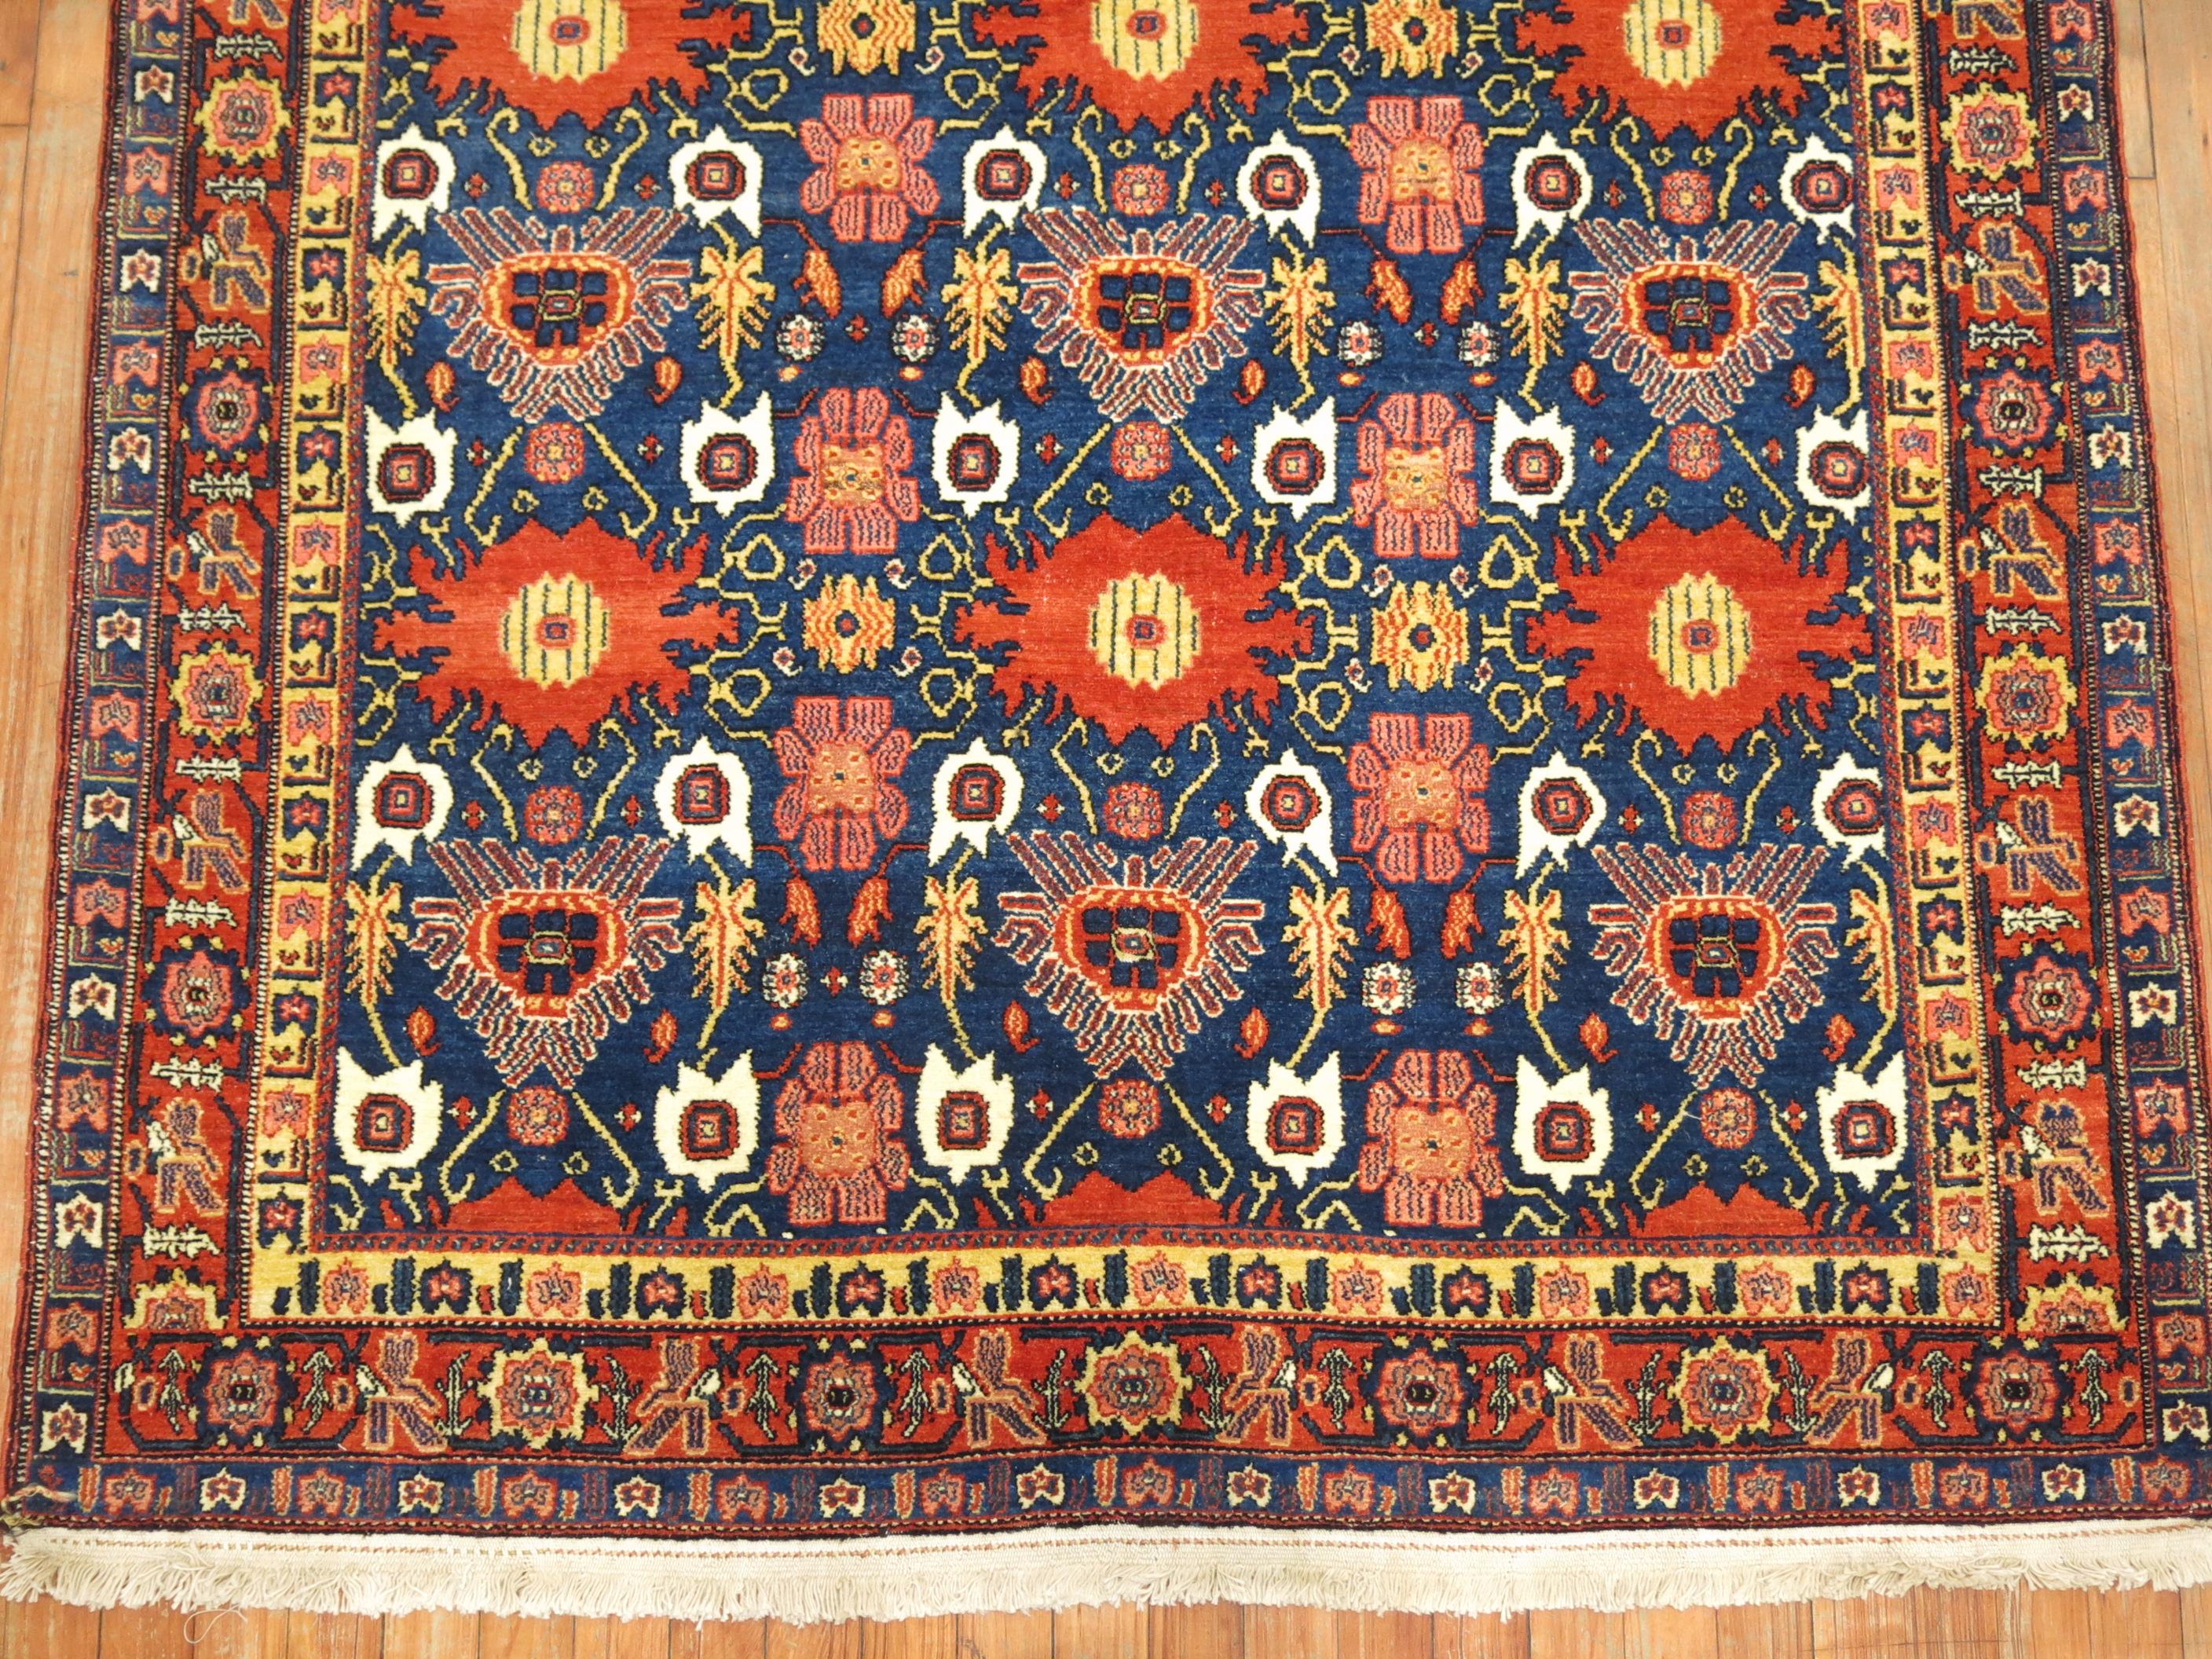 Spectacular collector level finely woven early 20th century Persian Senneh rug. This delightful intermediate size piece has overscale blossoms and a deftly dyed palette of warm and cool tones create a glowing character. Colorizing the alluring